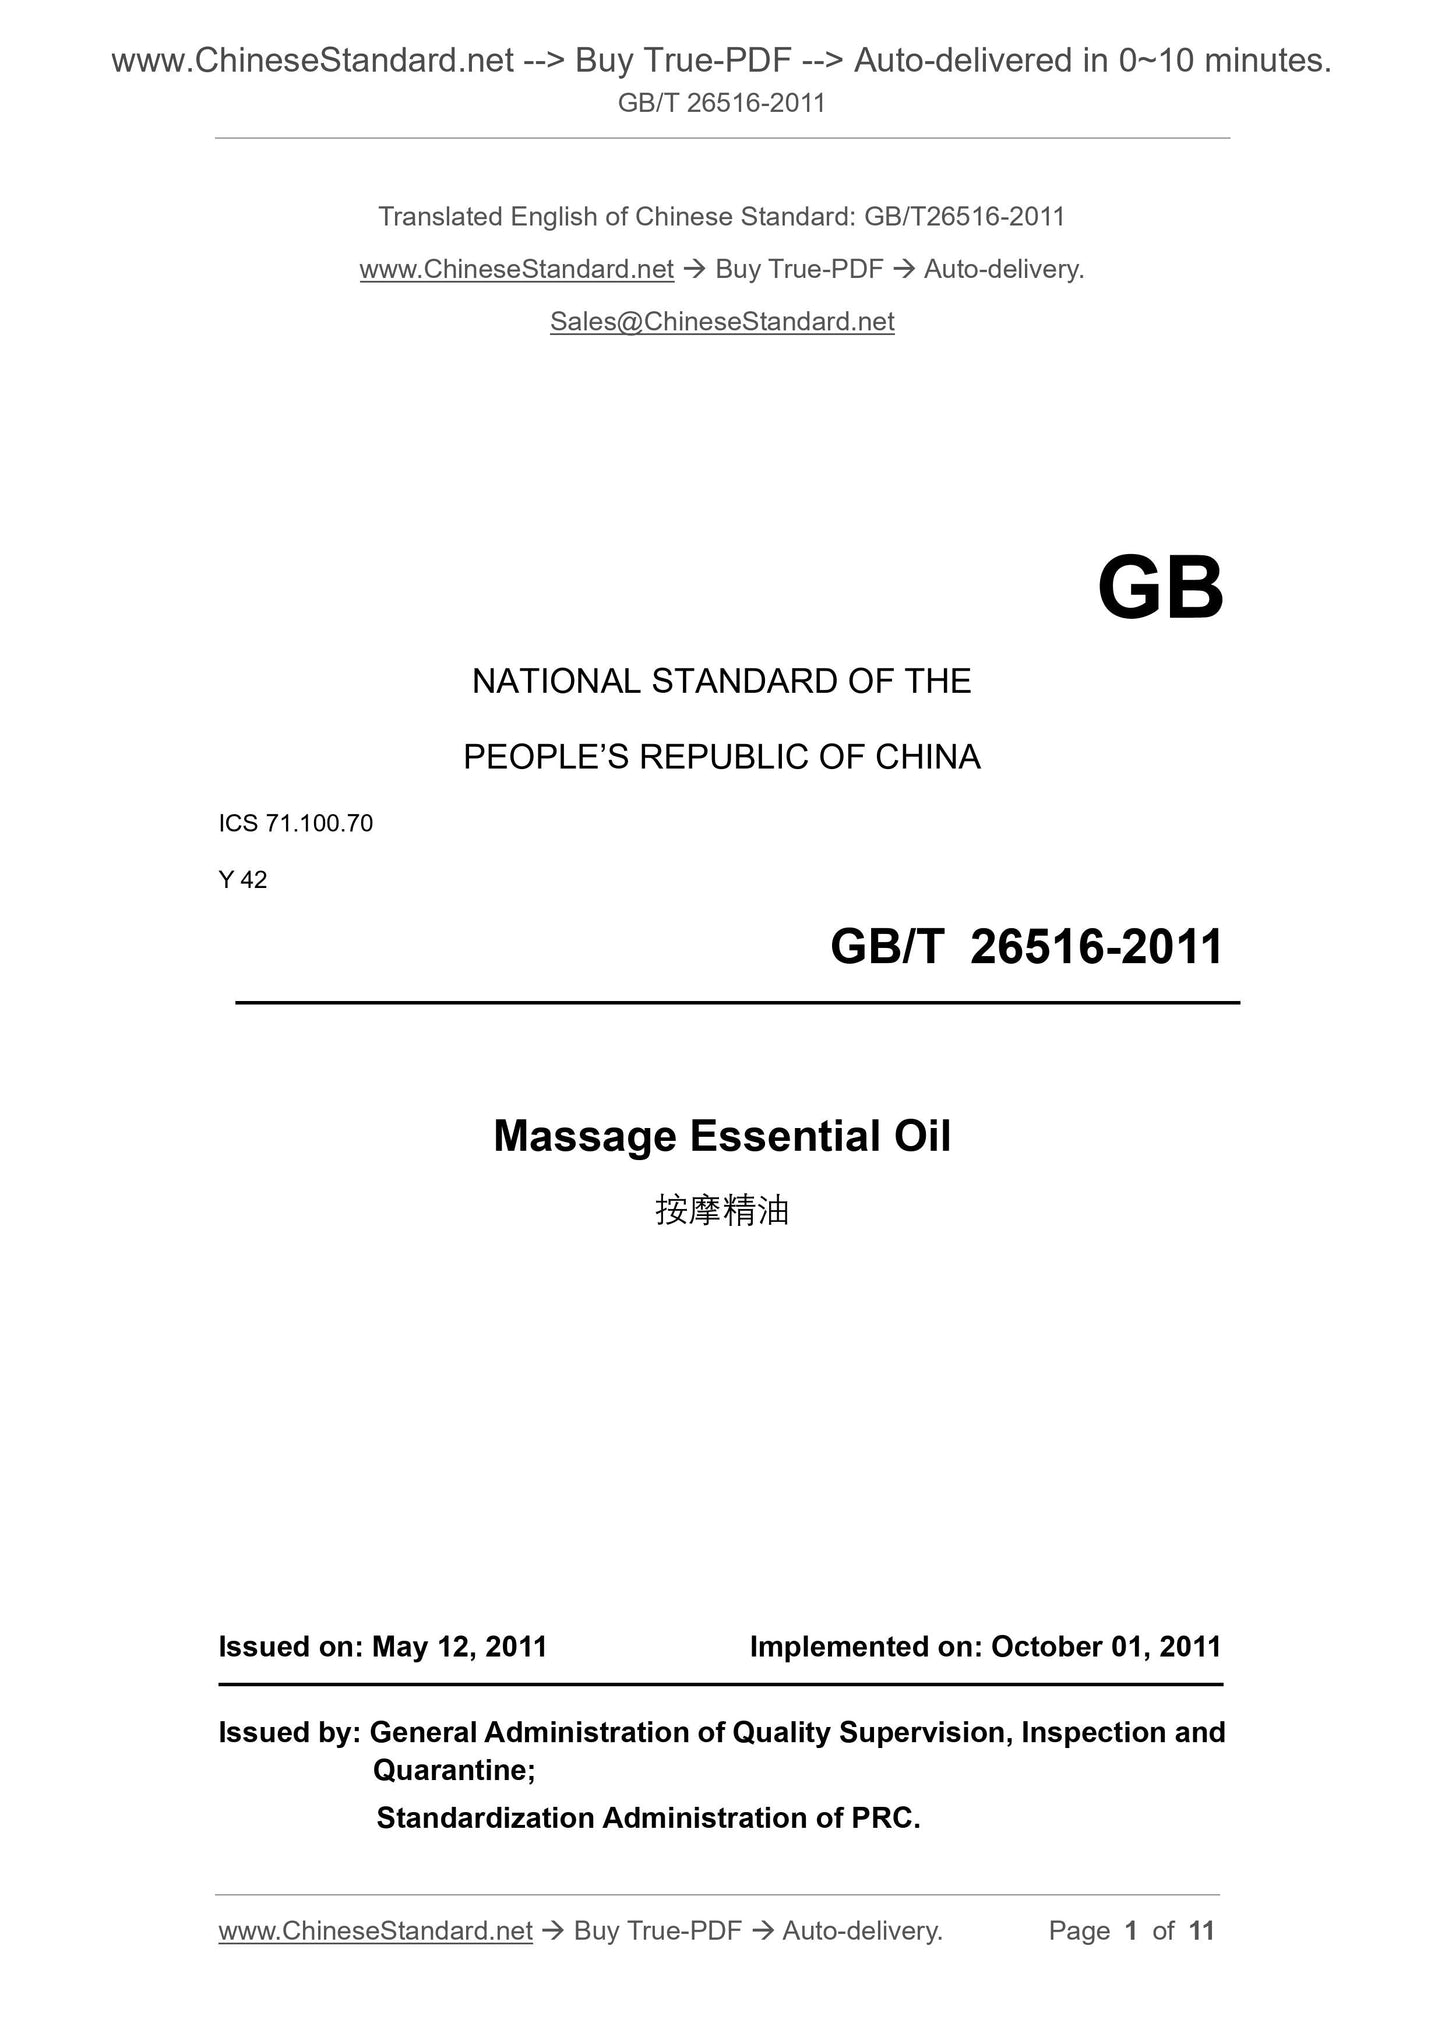 GB/T 26516-2011 Page 1